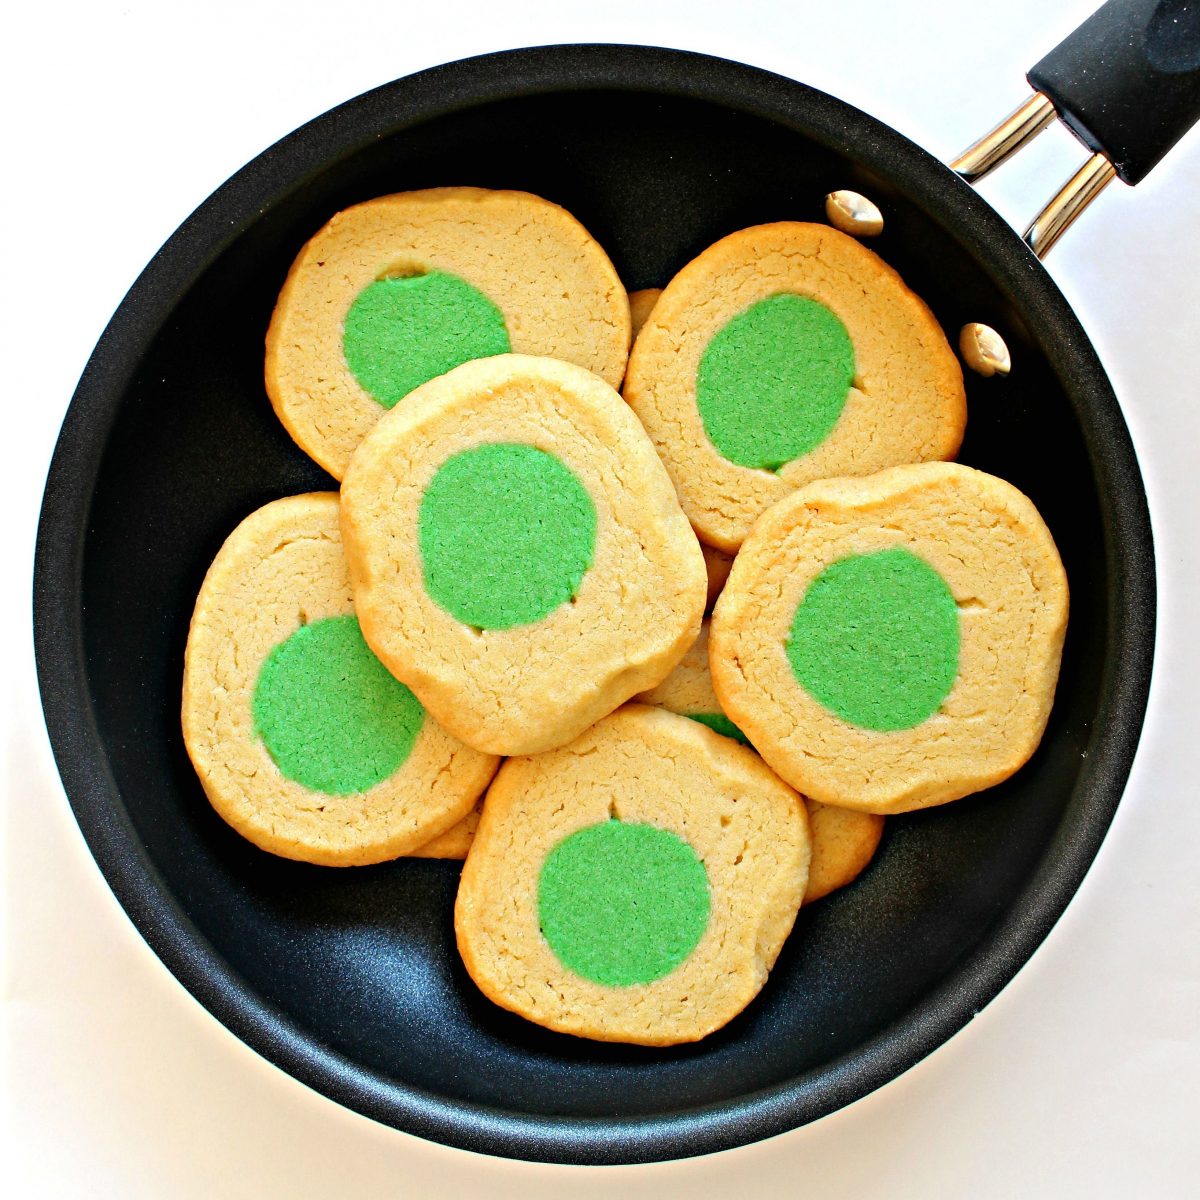 Cookies that look like eggs with green centers in a frying pan.